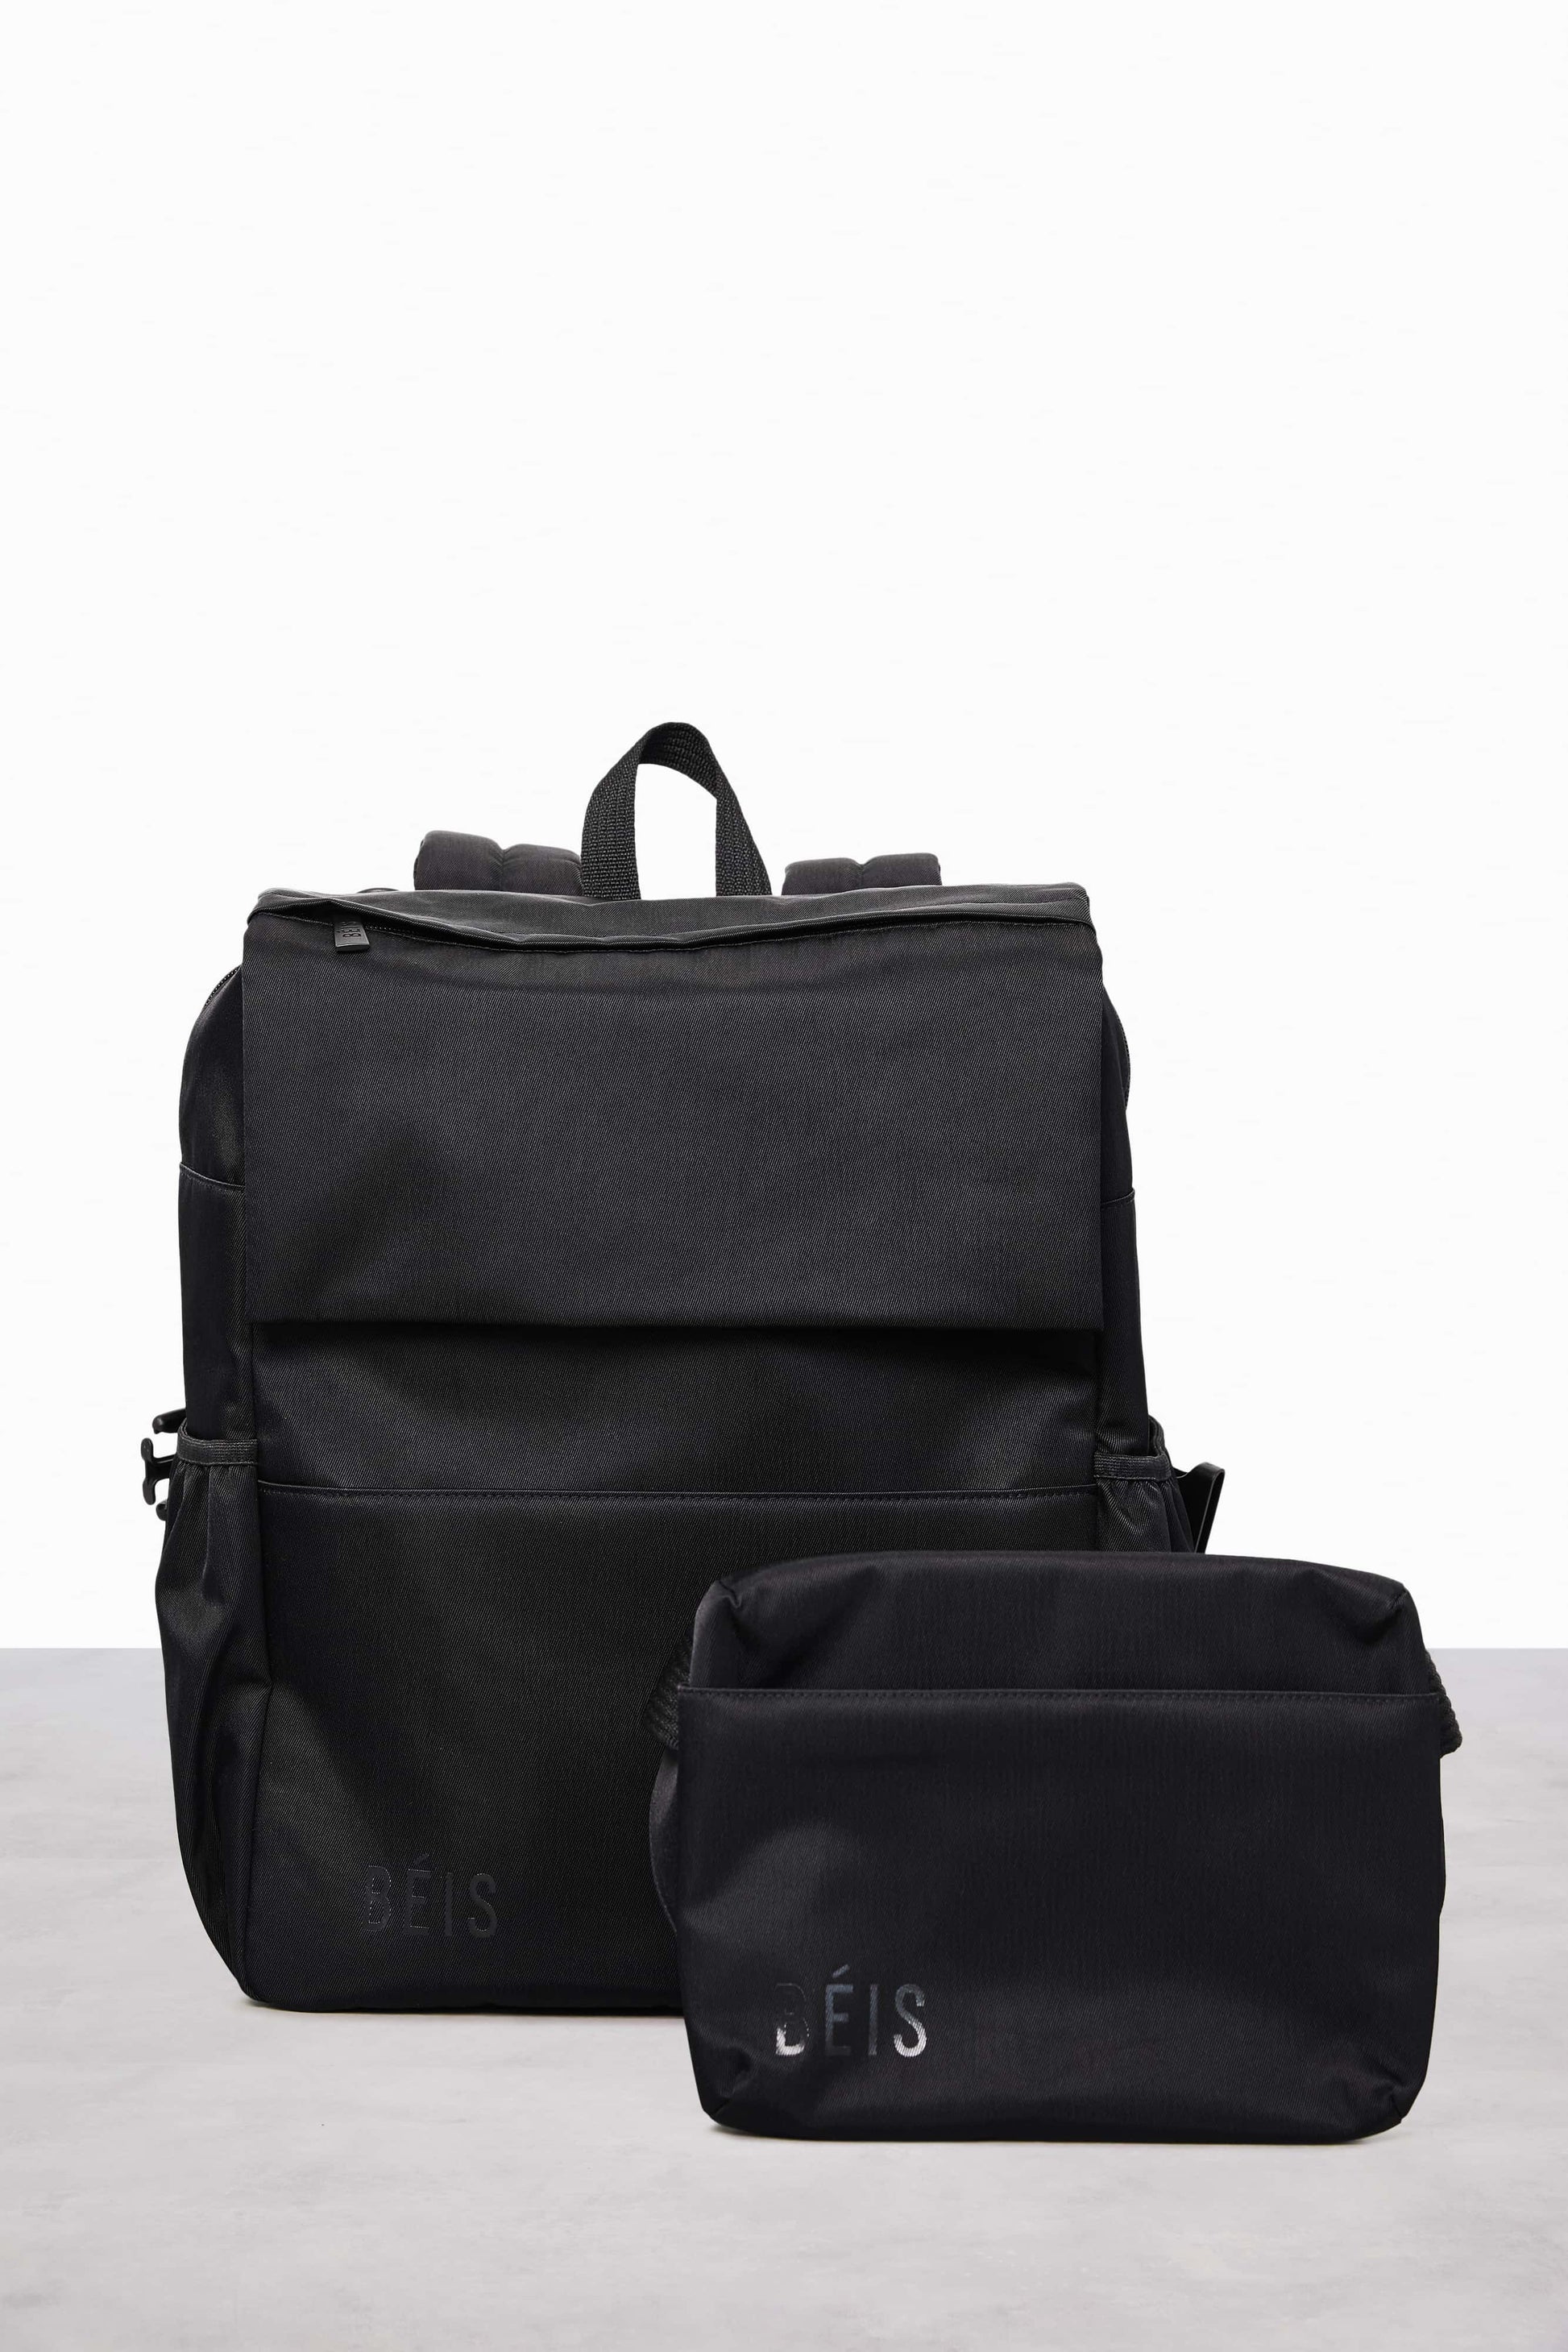 Question- Does anyone know when this bag will restock? Thank you